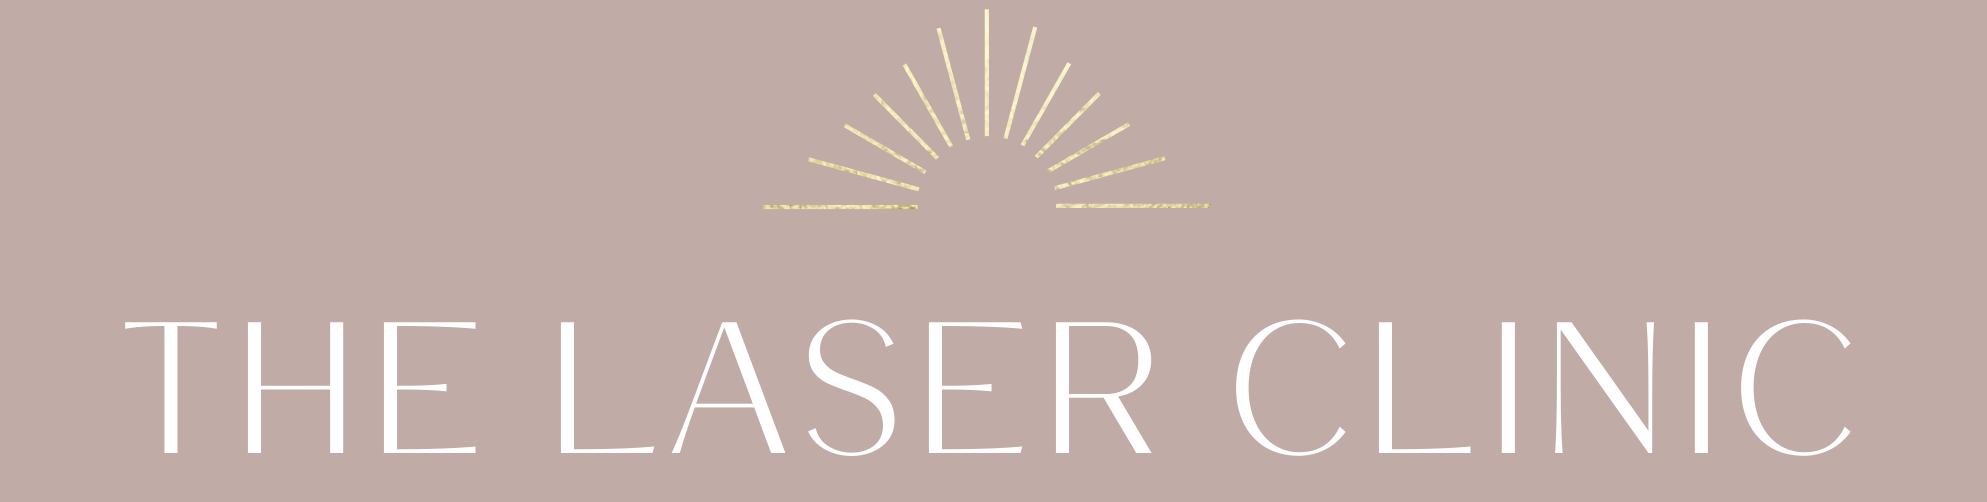 The Laser Clinic Hull